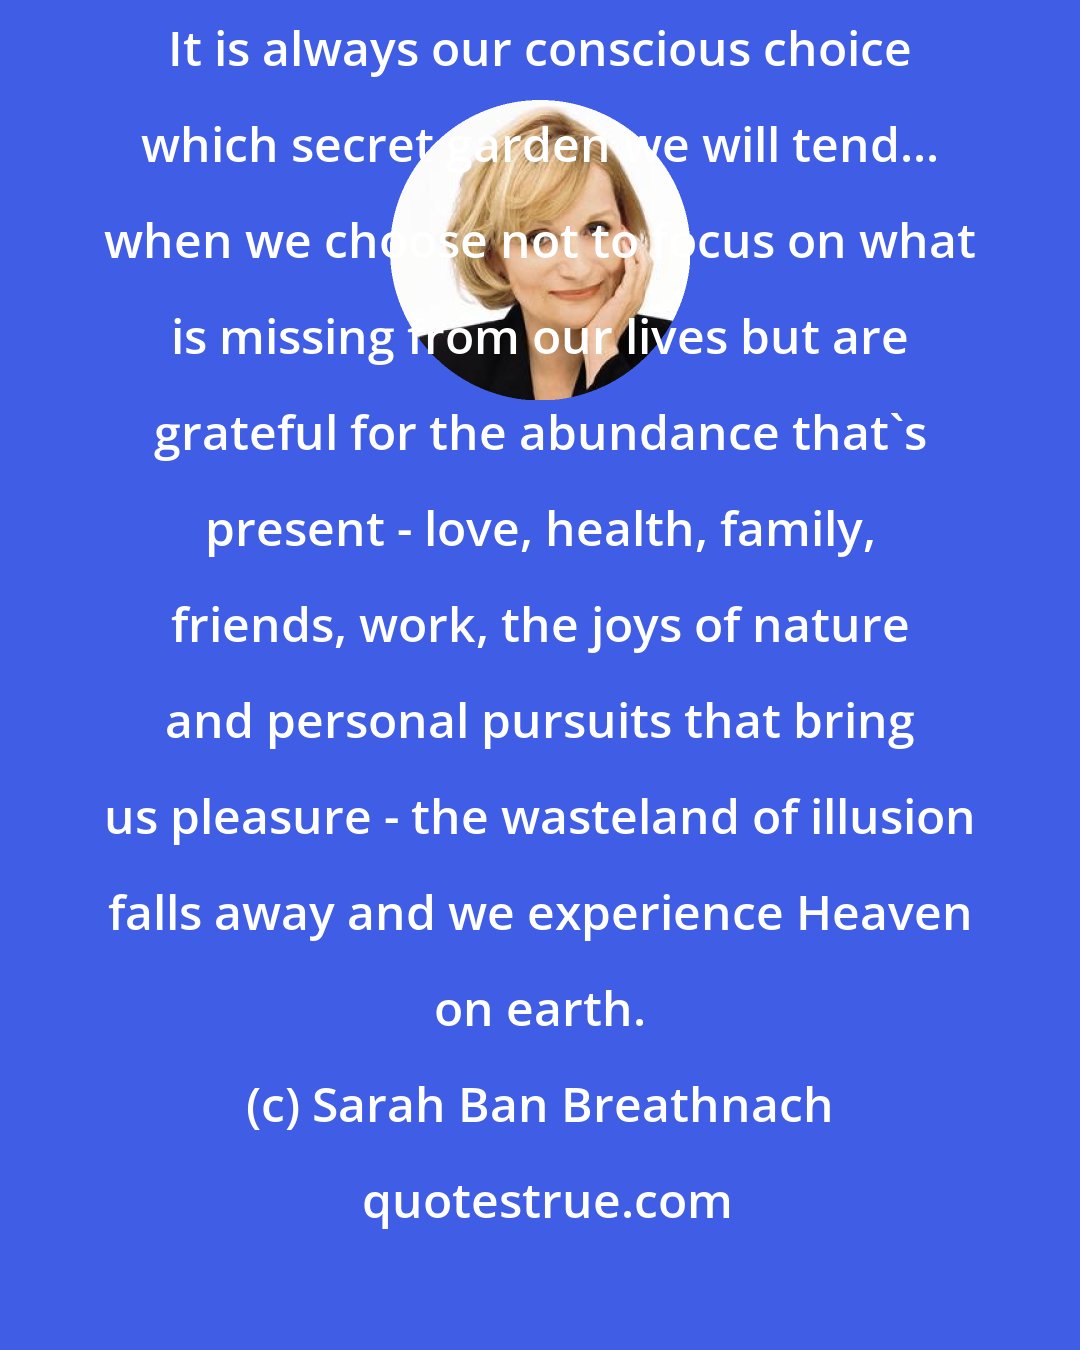 Sarah Ban Breathnach: Both abundance and lack exist simultaneously in our lives, as parallel realities. It is always our conscious choice which secret garden we will tend... when we choose not to focus on what is missing from our lives but are grateful for the abundance that's present - love, health, family, friends, work, the joys of nature and personal pursuits that bring us pleasure - the wasteland of illusion falls away and we experience Heaven on earth.